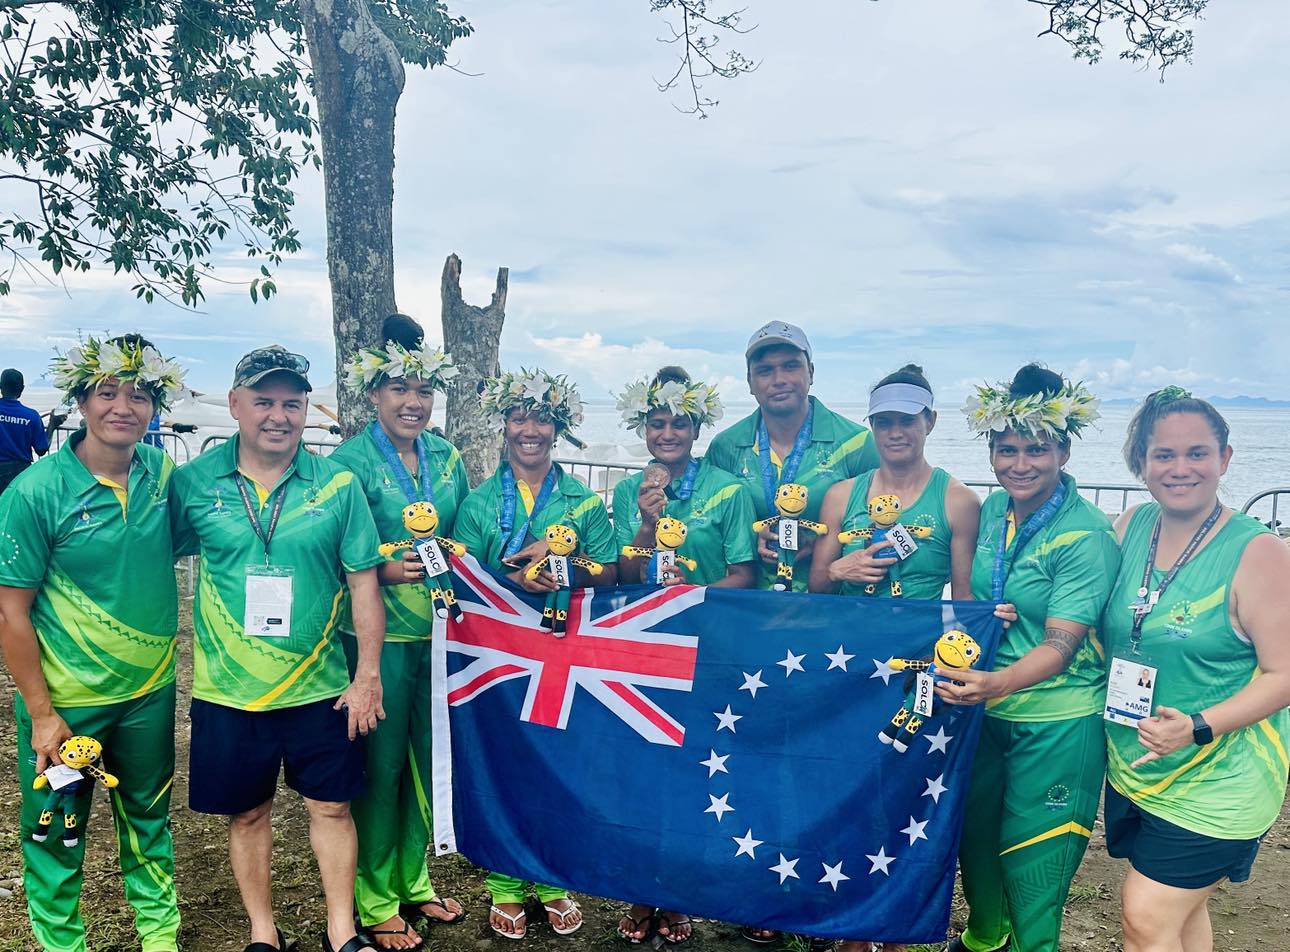 Cook Islands oe vaka team paddles to podium with bronze medals